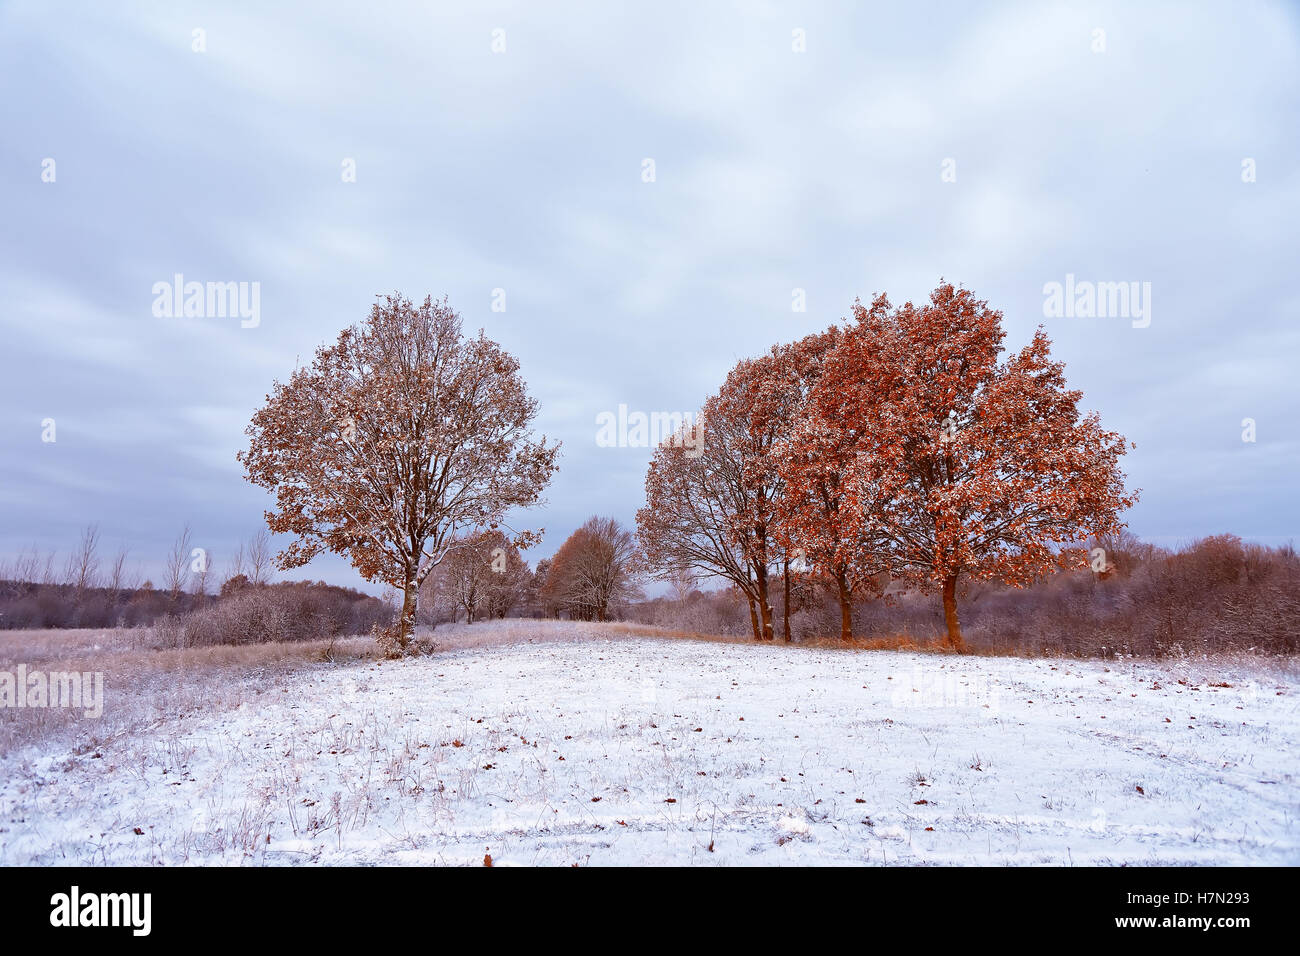 First snow in the autumn forest. Fall colors on the trees. Belarus autumn Landscape Stock Photo